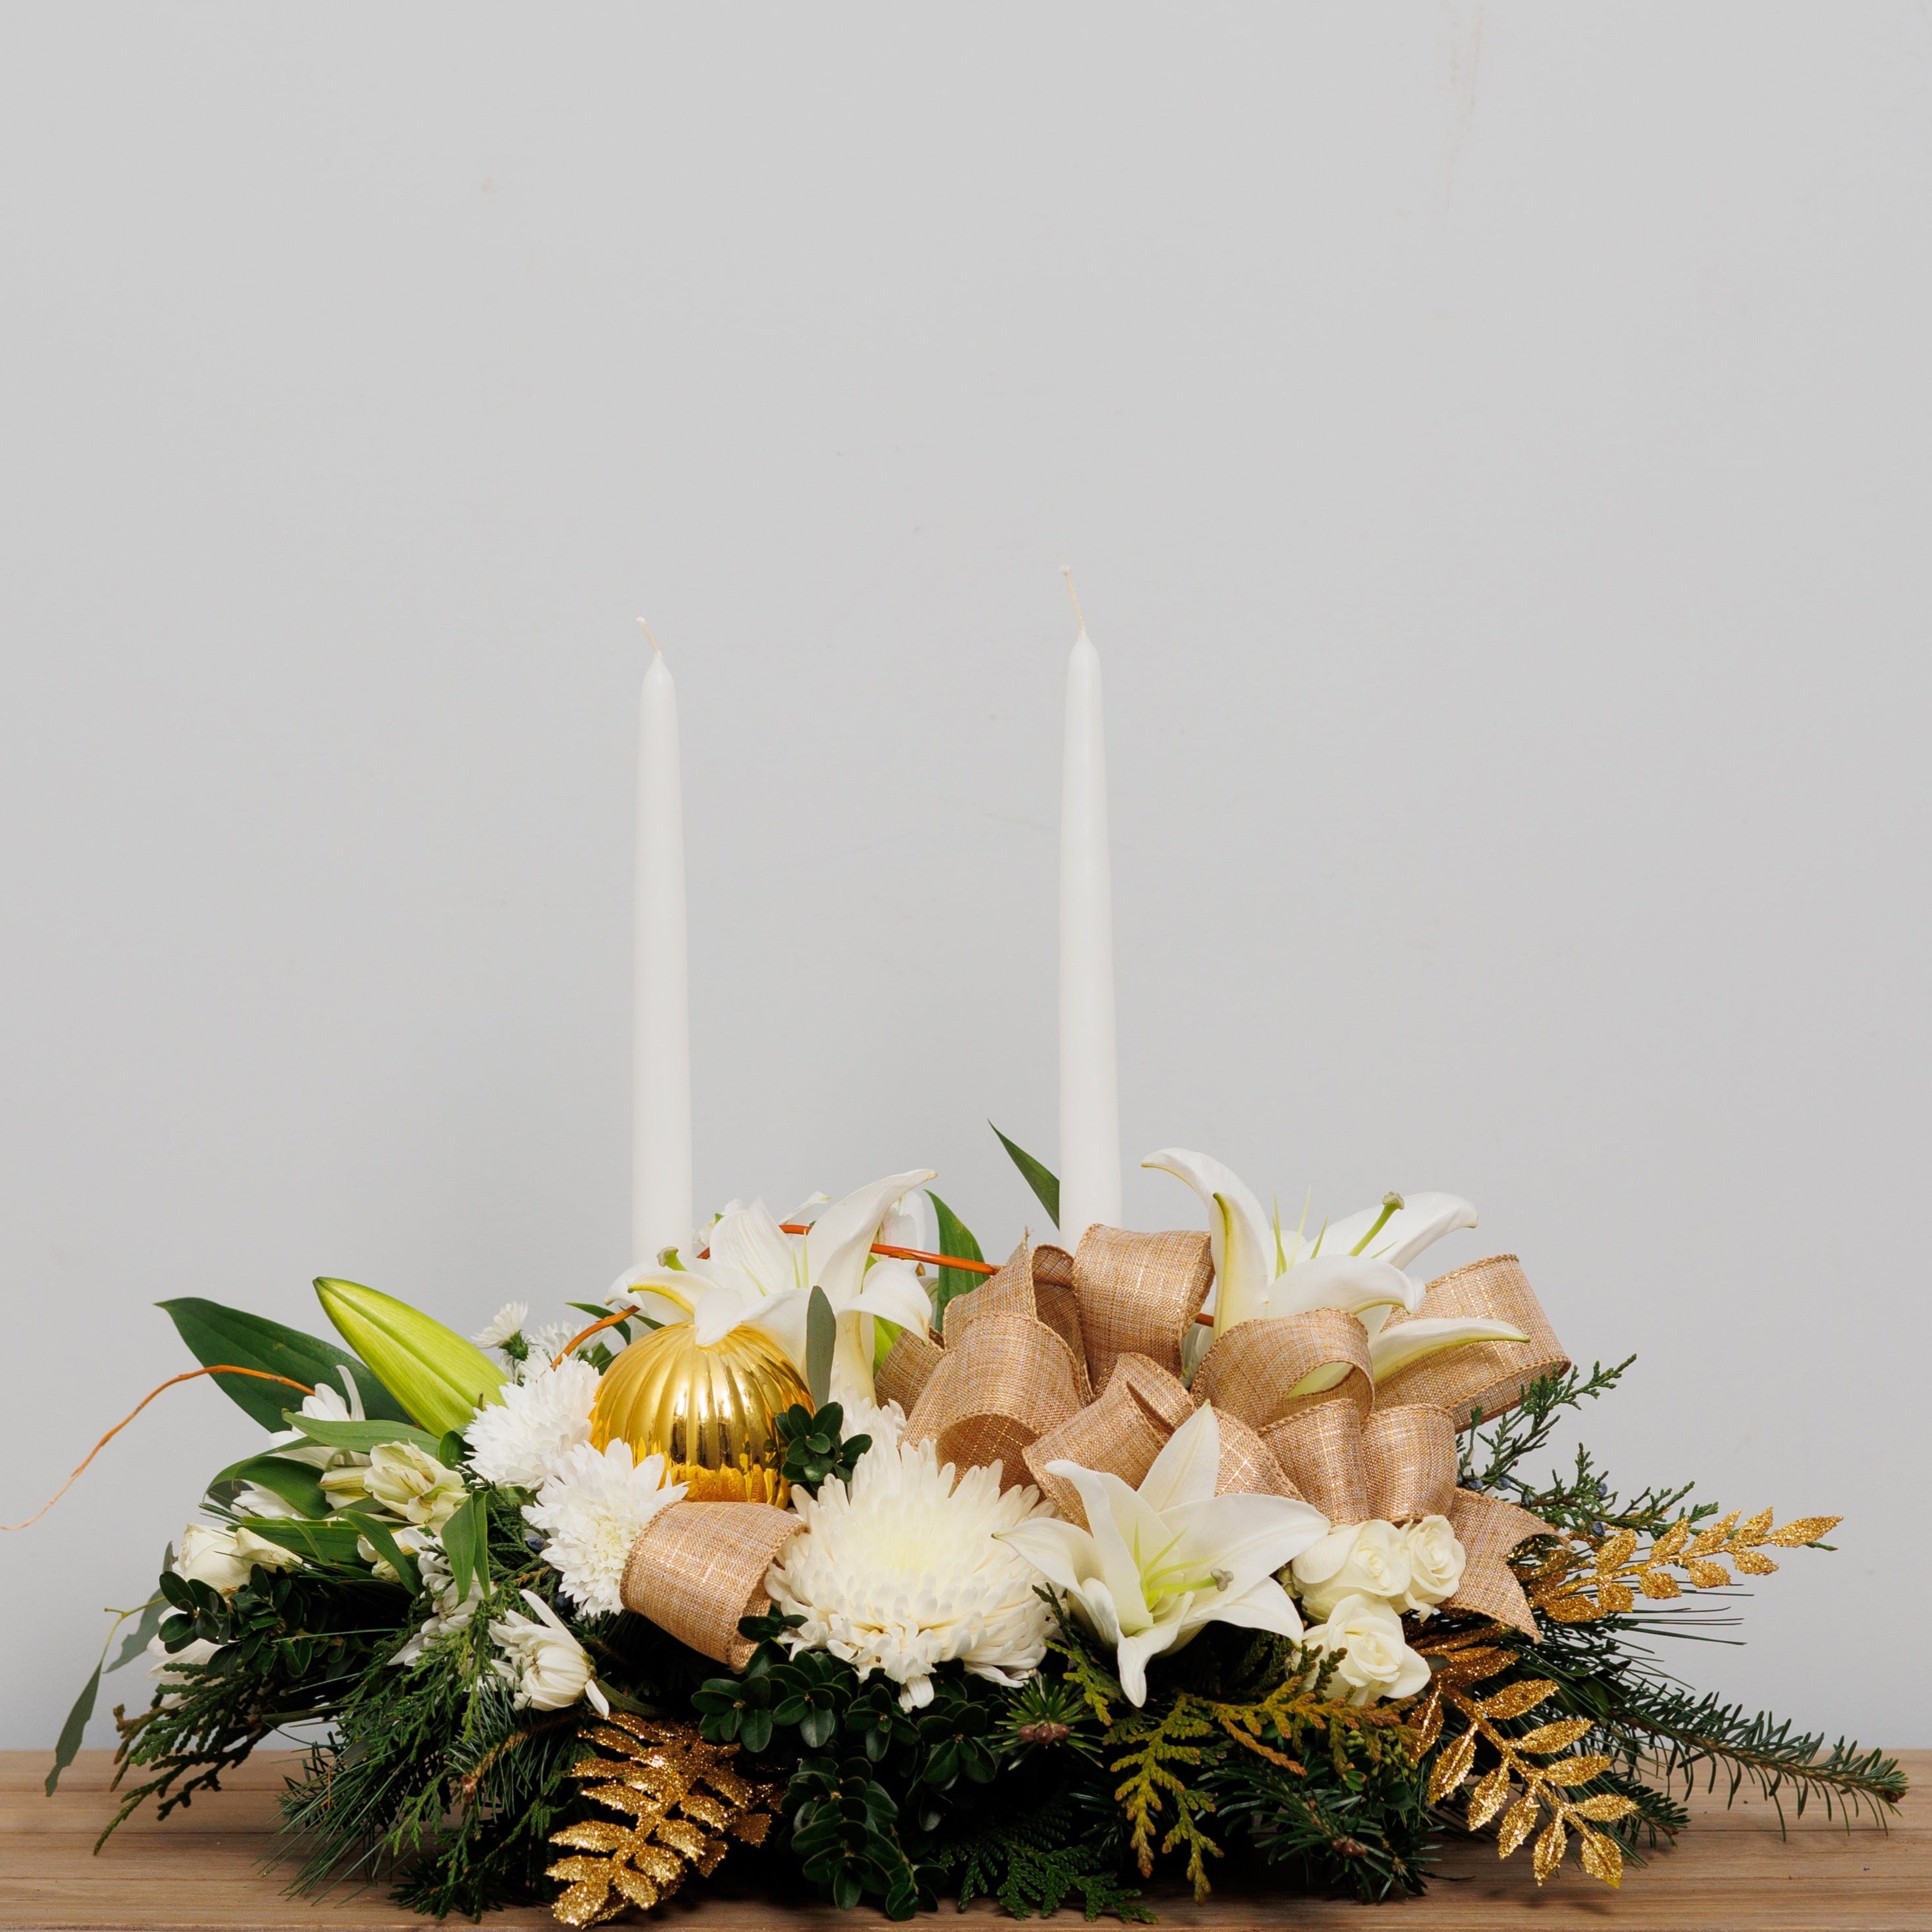 A white Christmas centerpiece with gold accents and two candles.